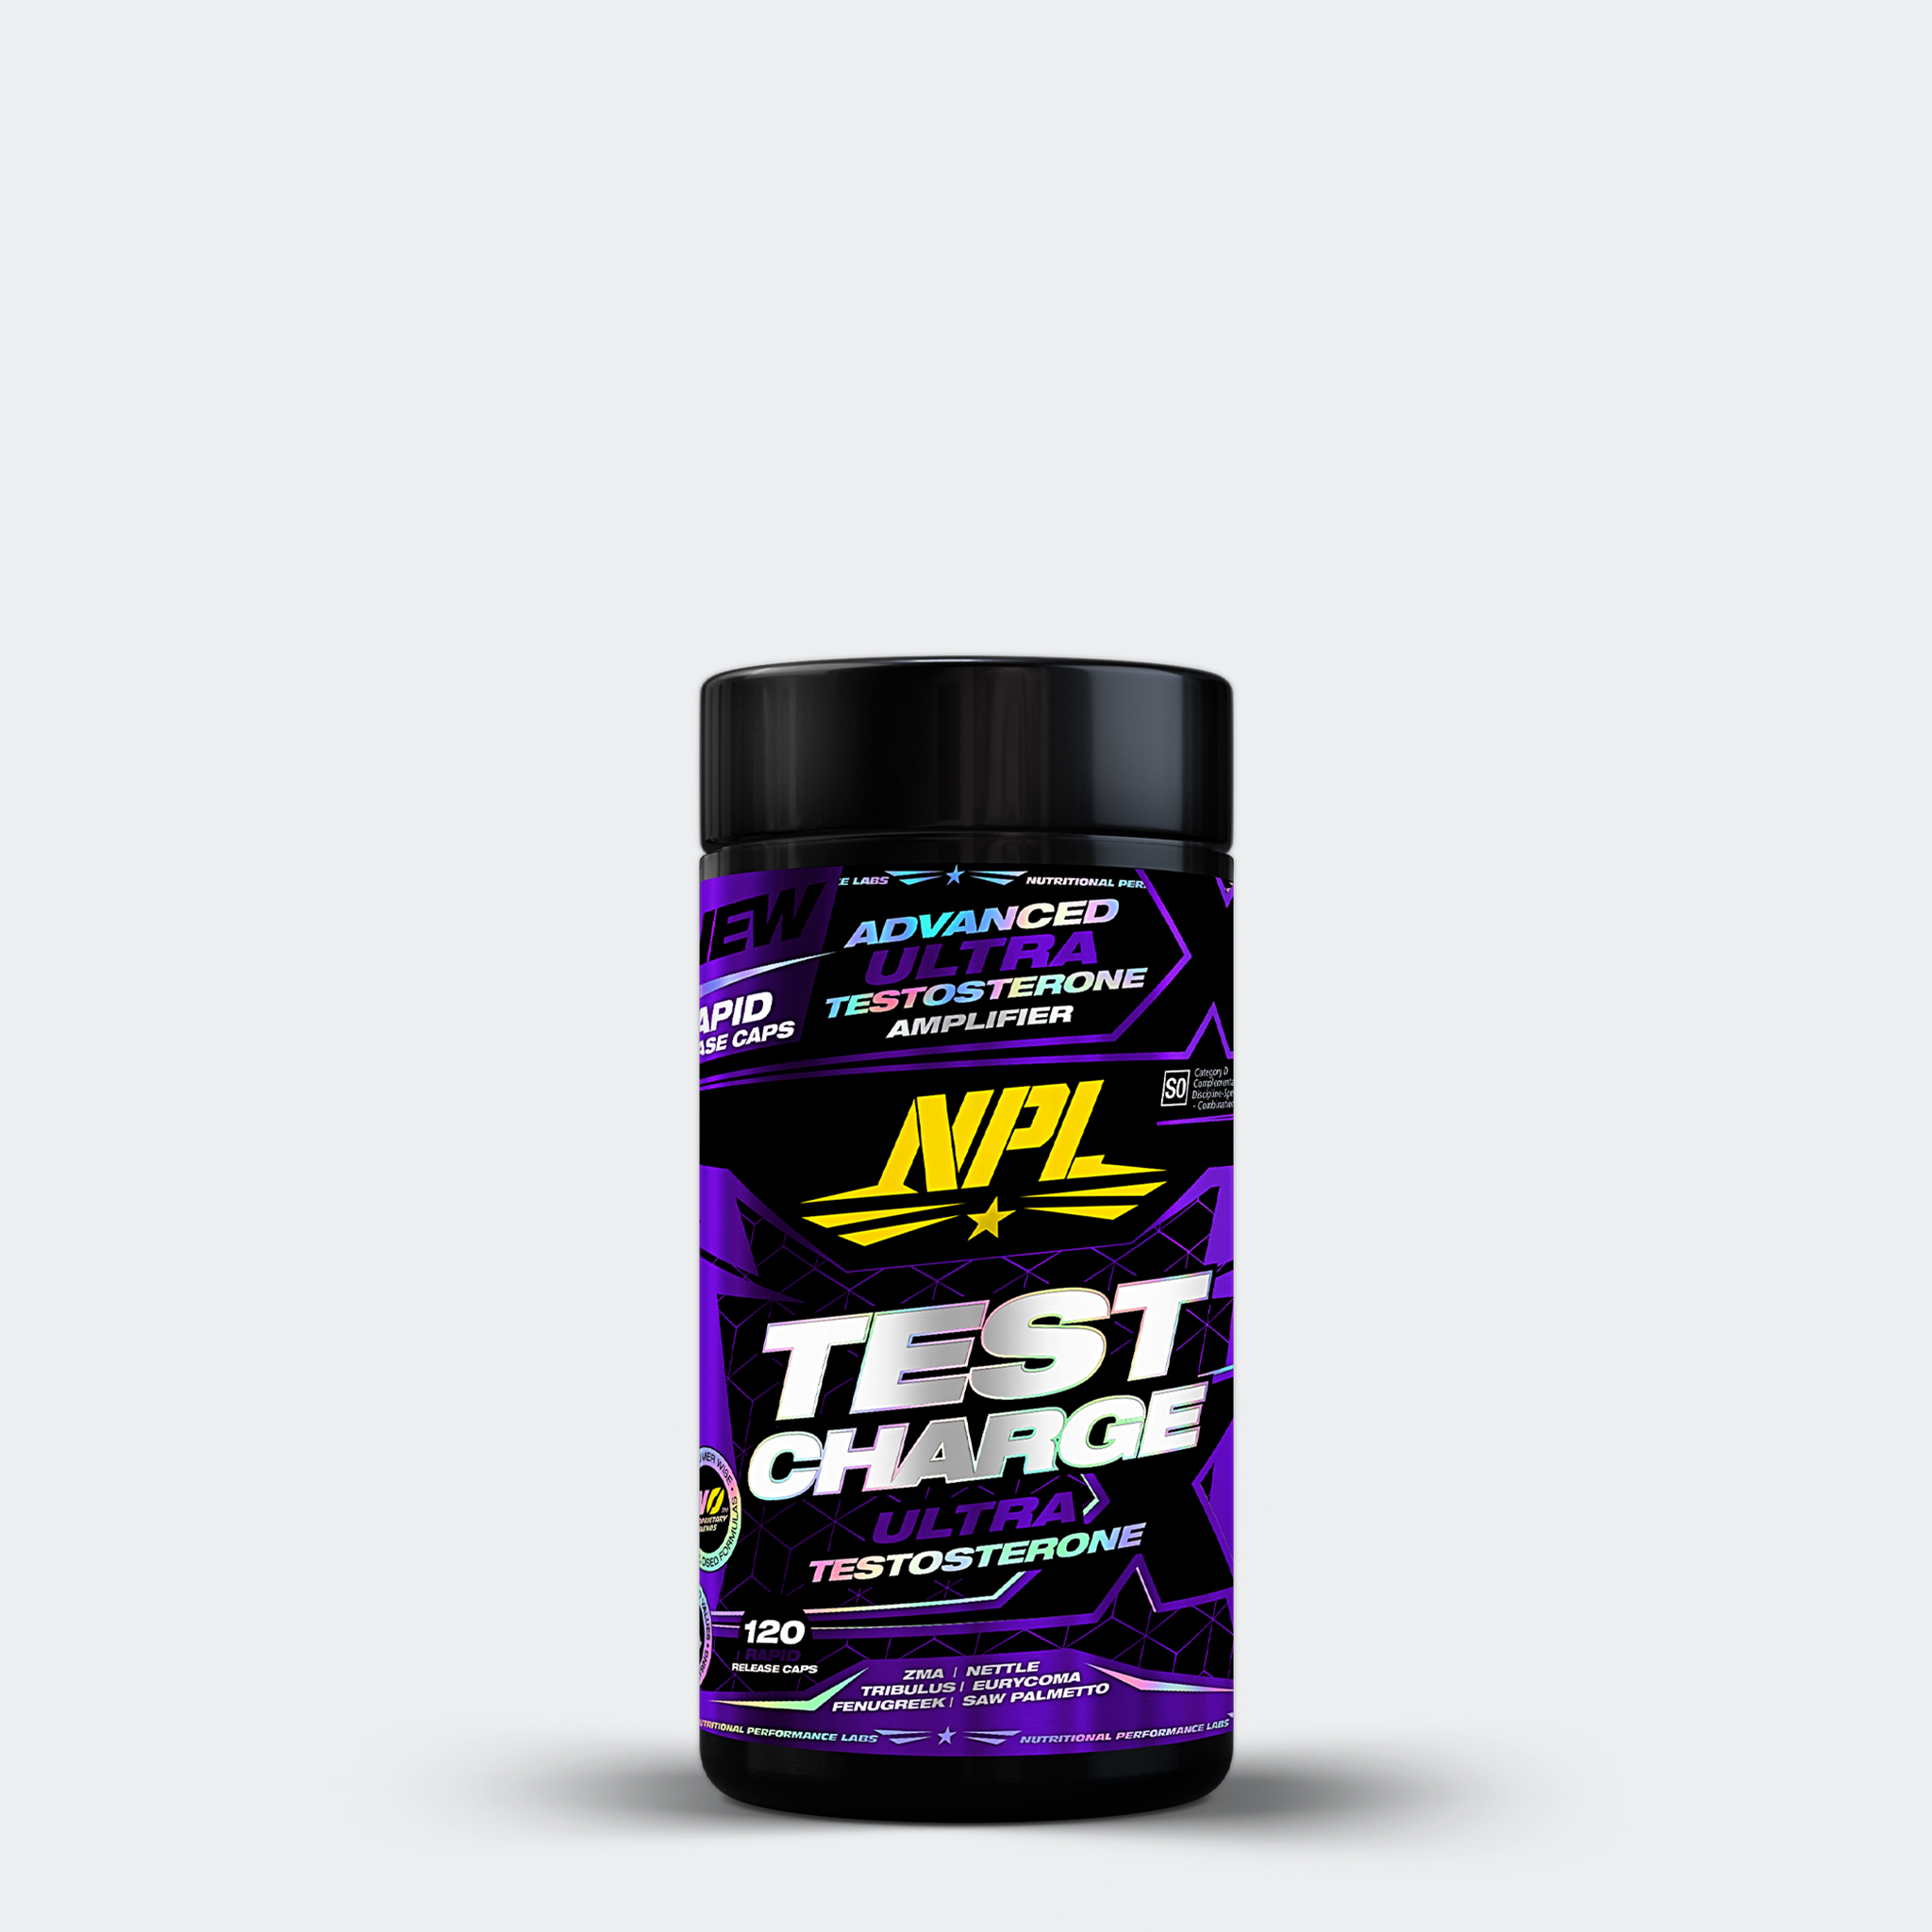 NPL test charge testosterone booster, advanced test booster for optimal performance and recovery